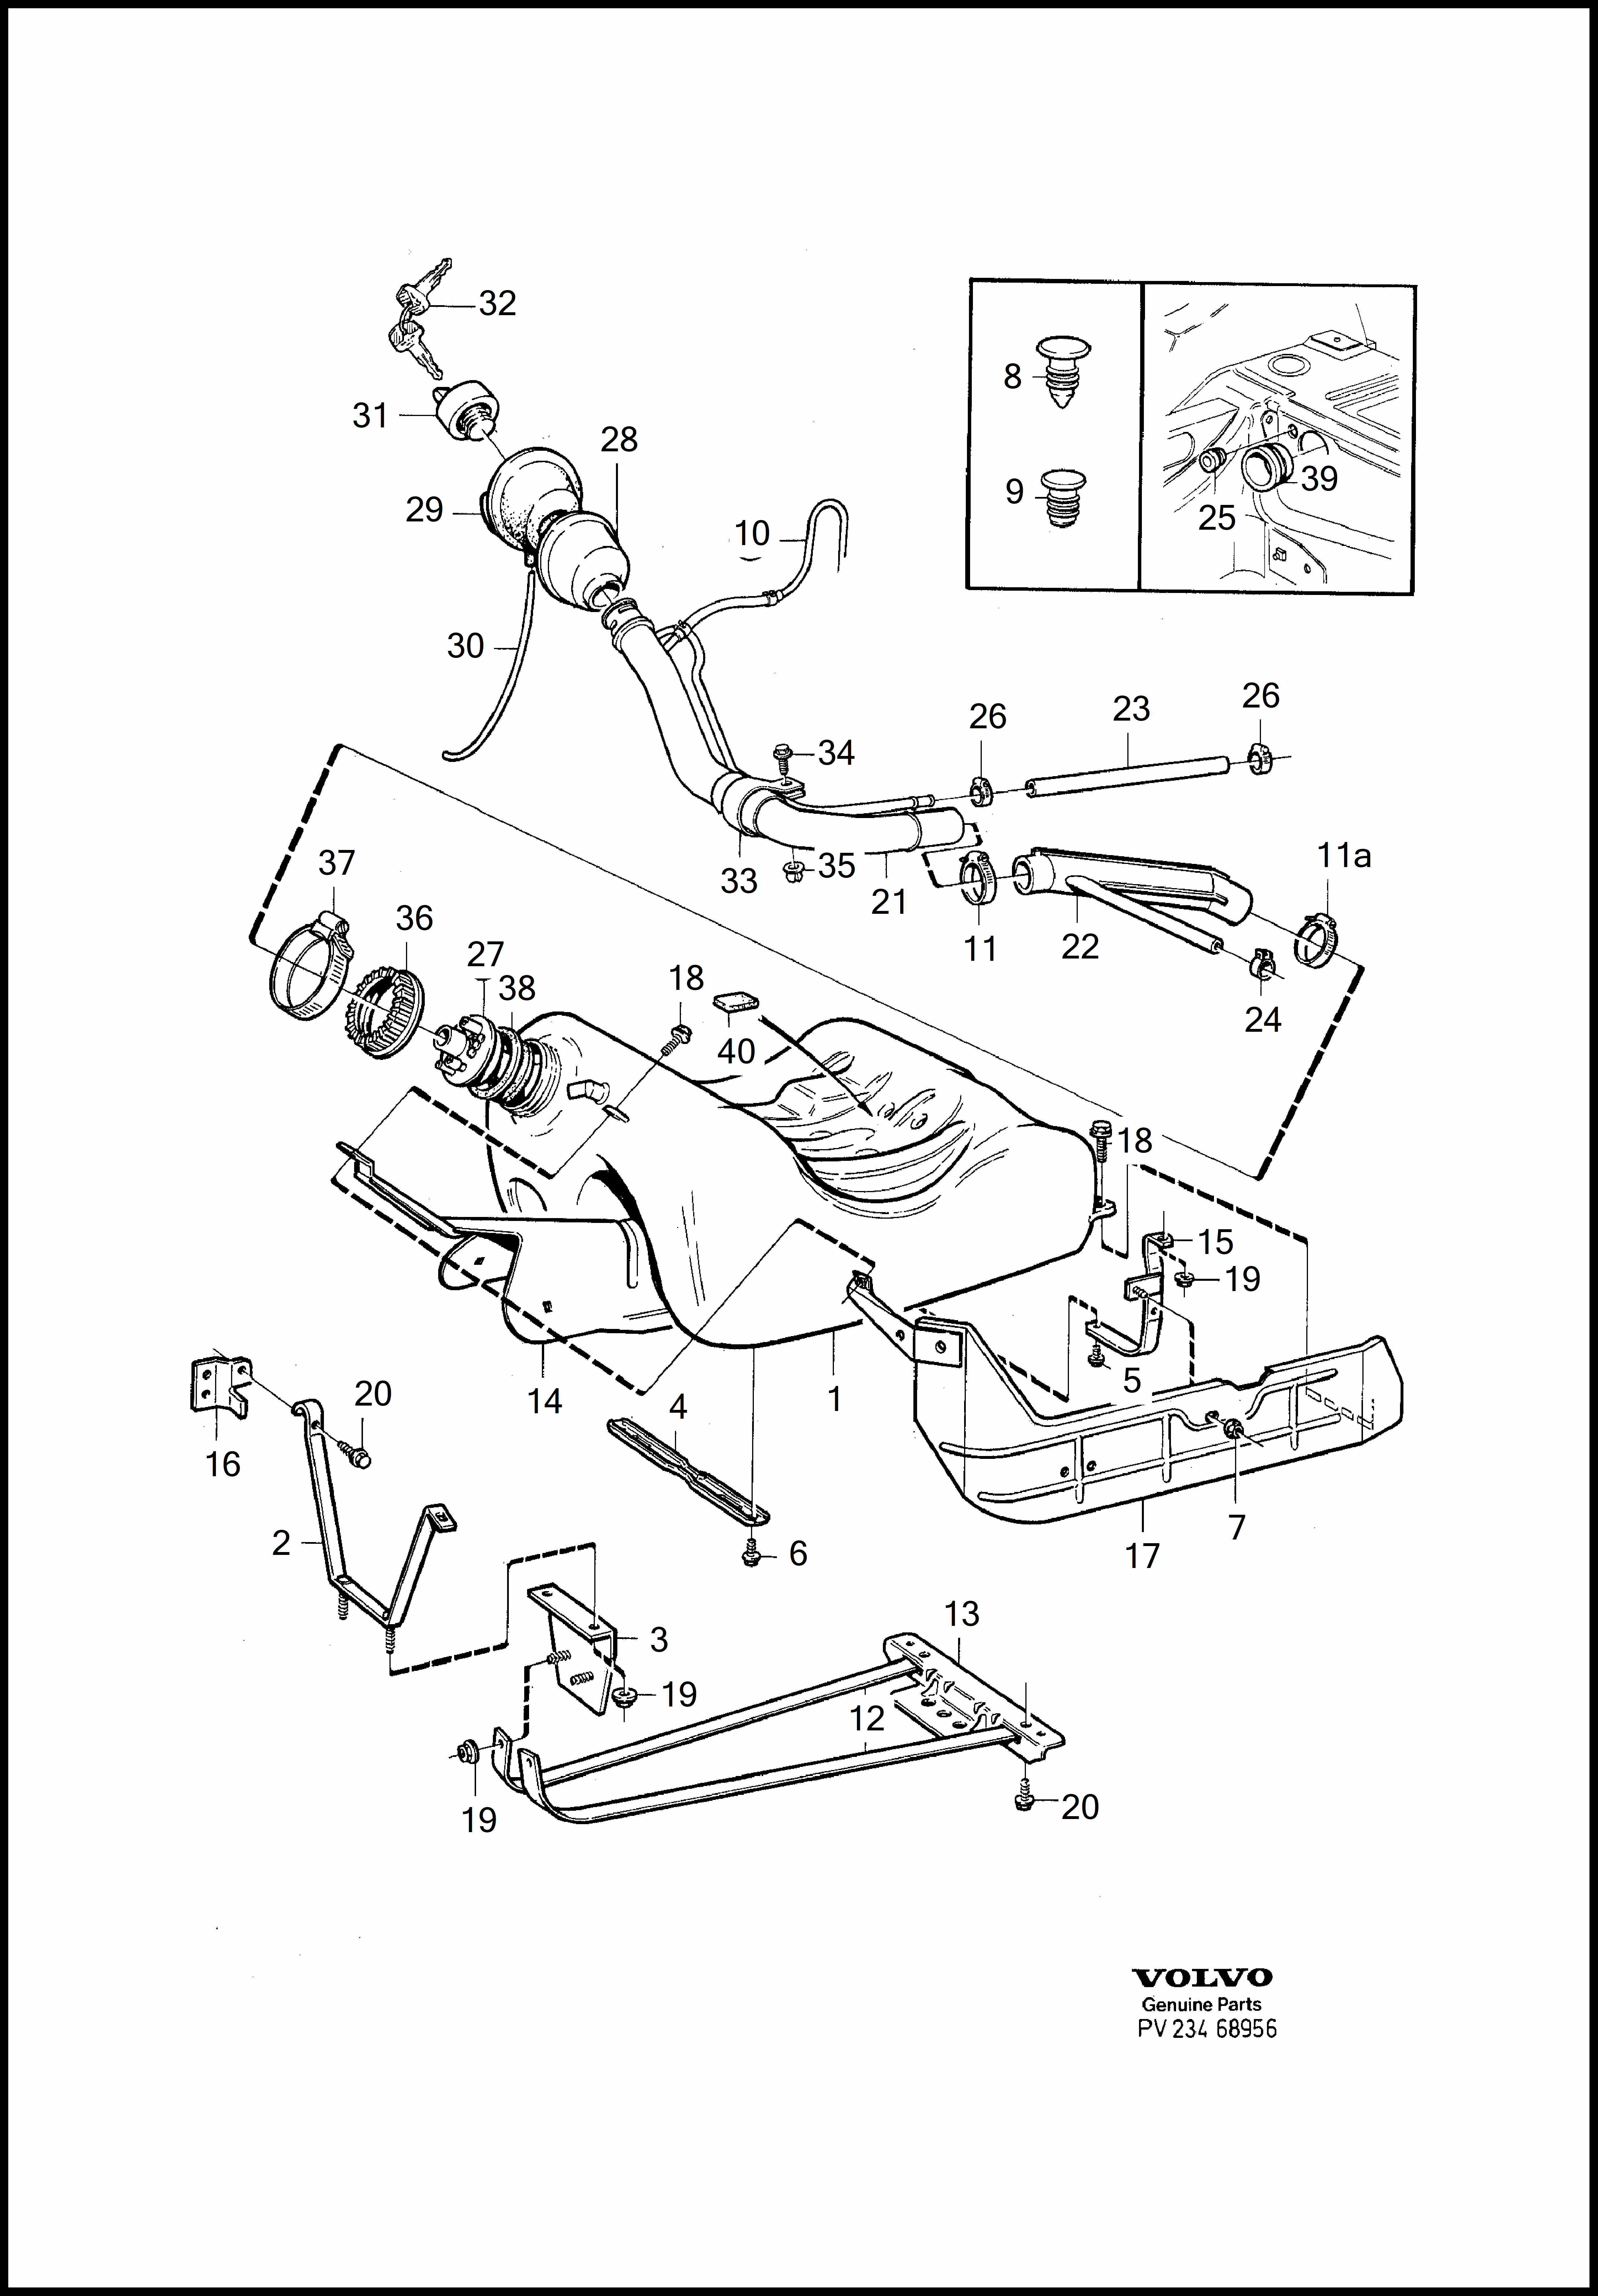 fuel tank and connecting parts pro Volvo 960 960